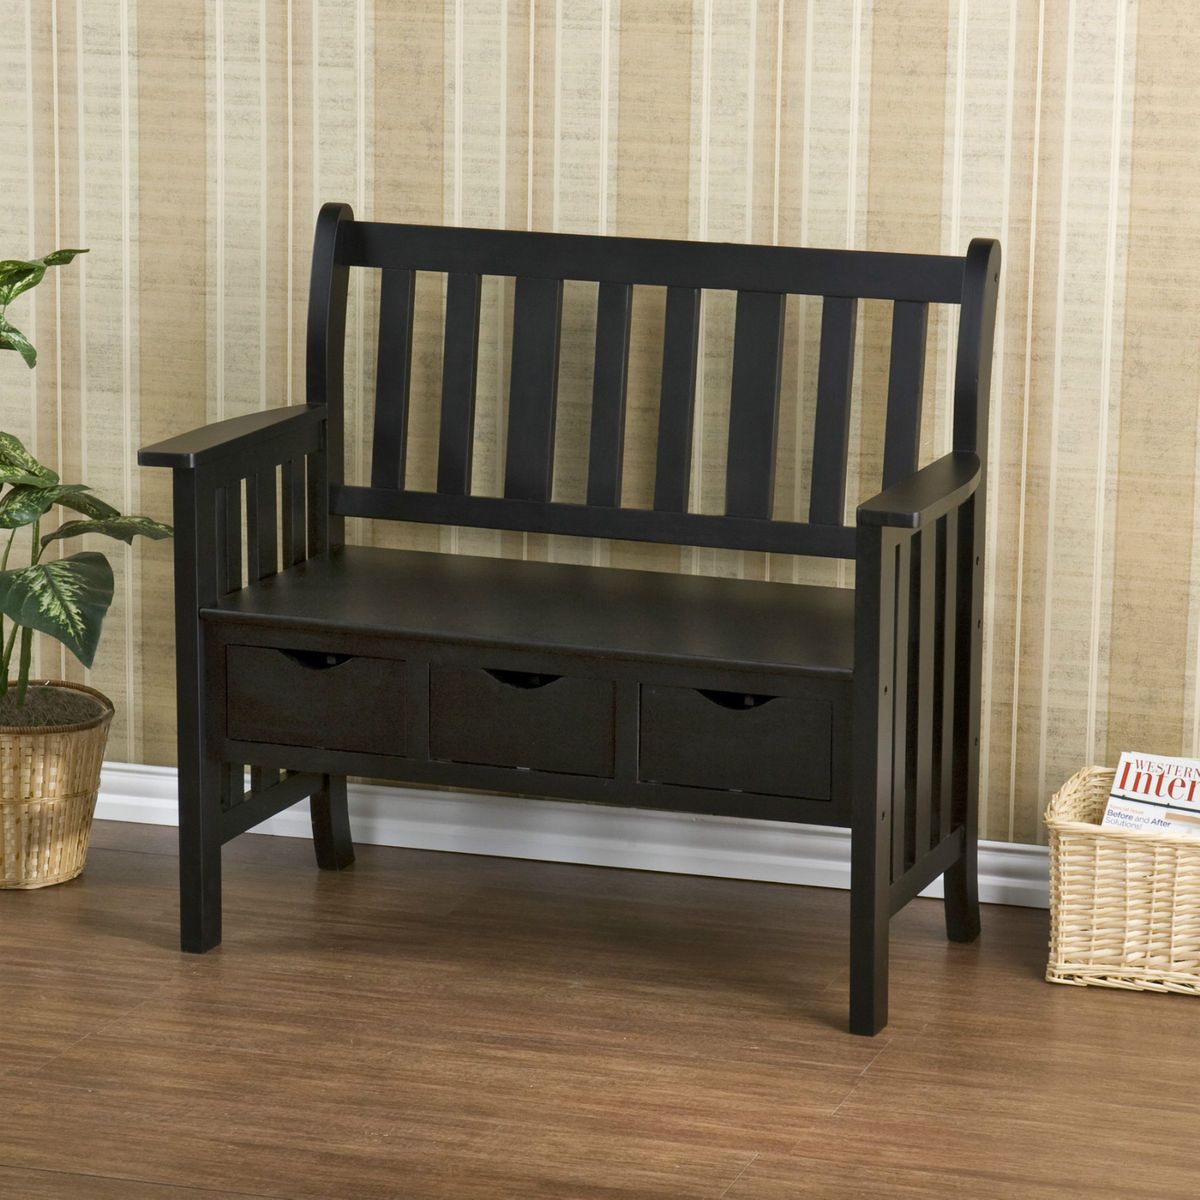 Drawer Black Country Bench 3 Storage Drawers Seat Entryway Foyer